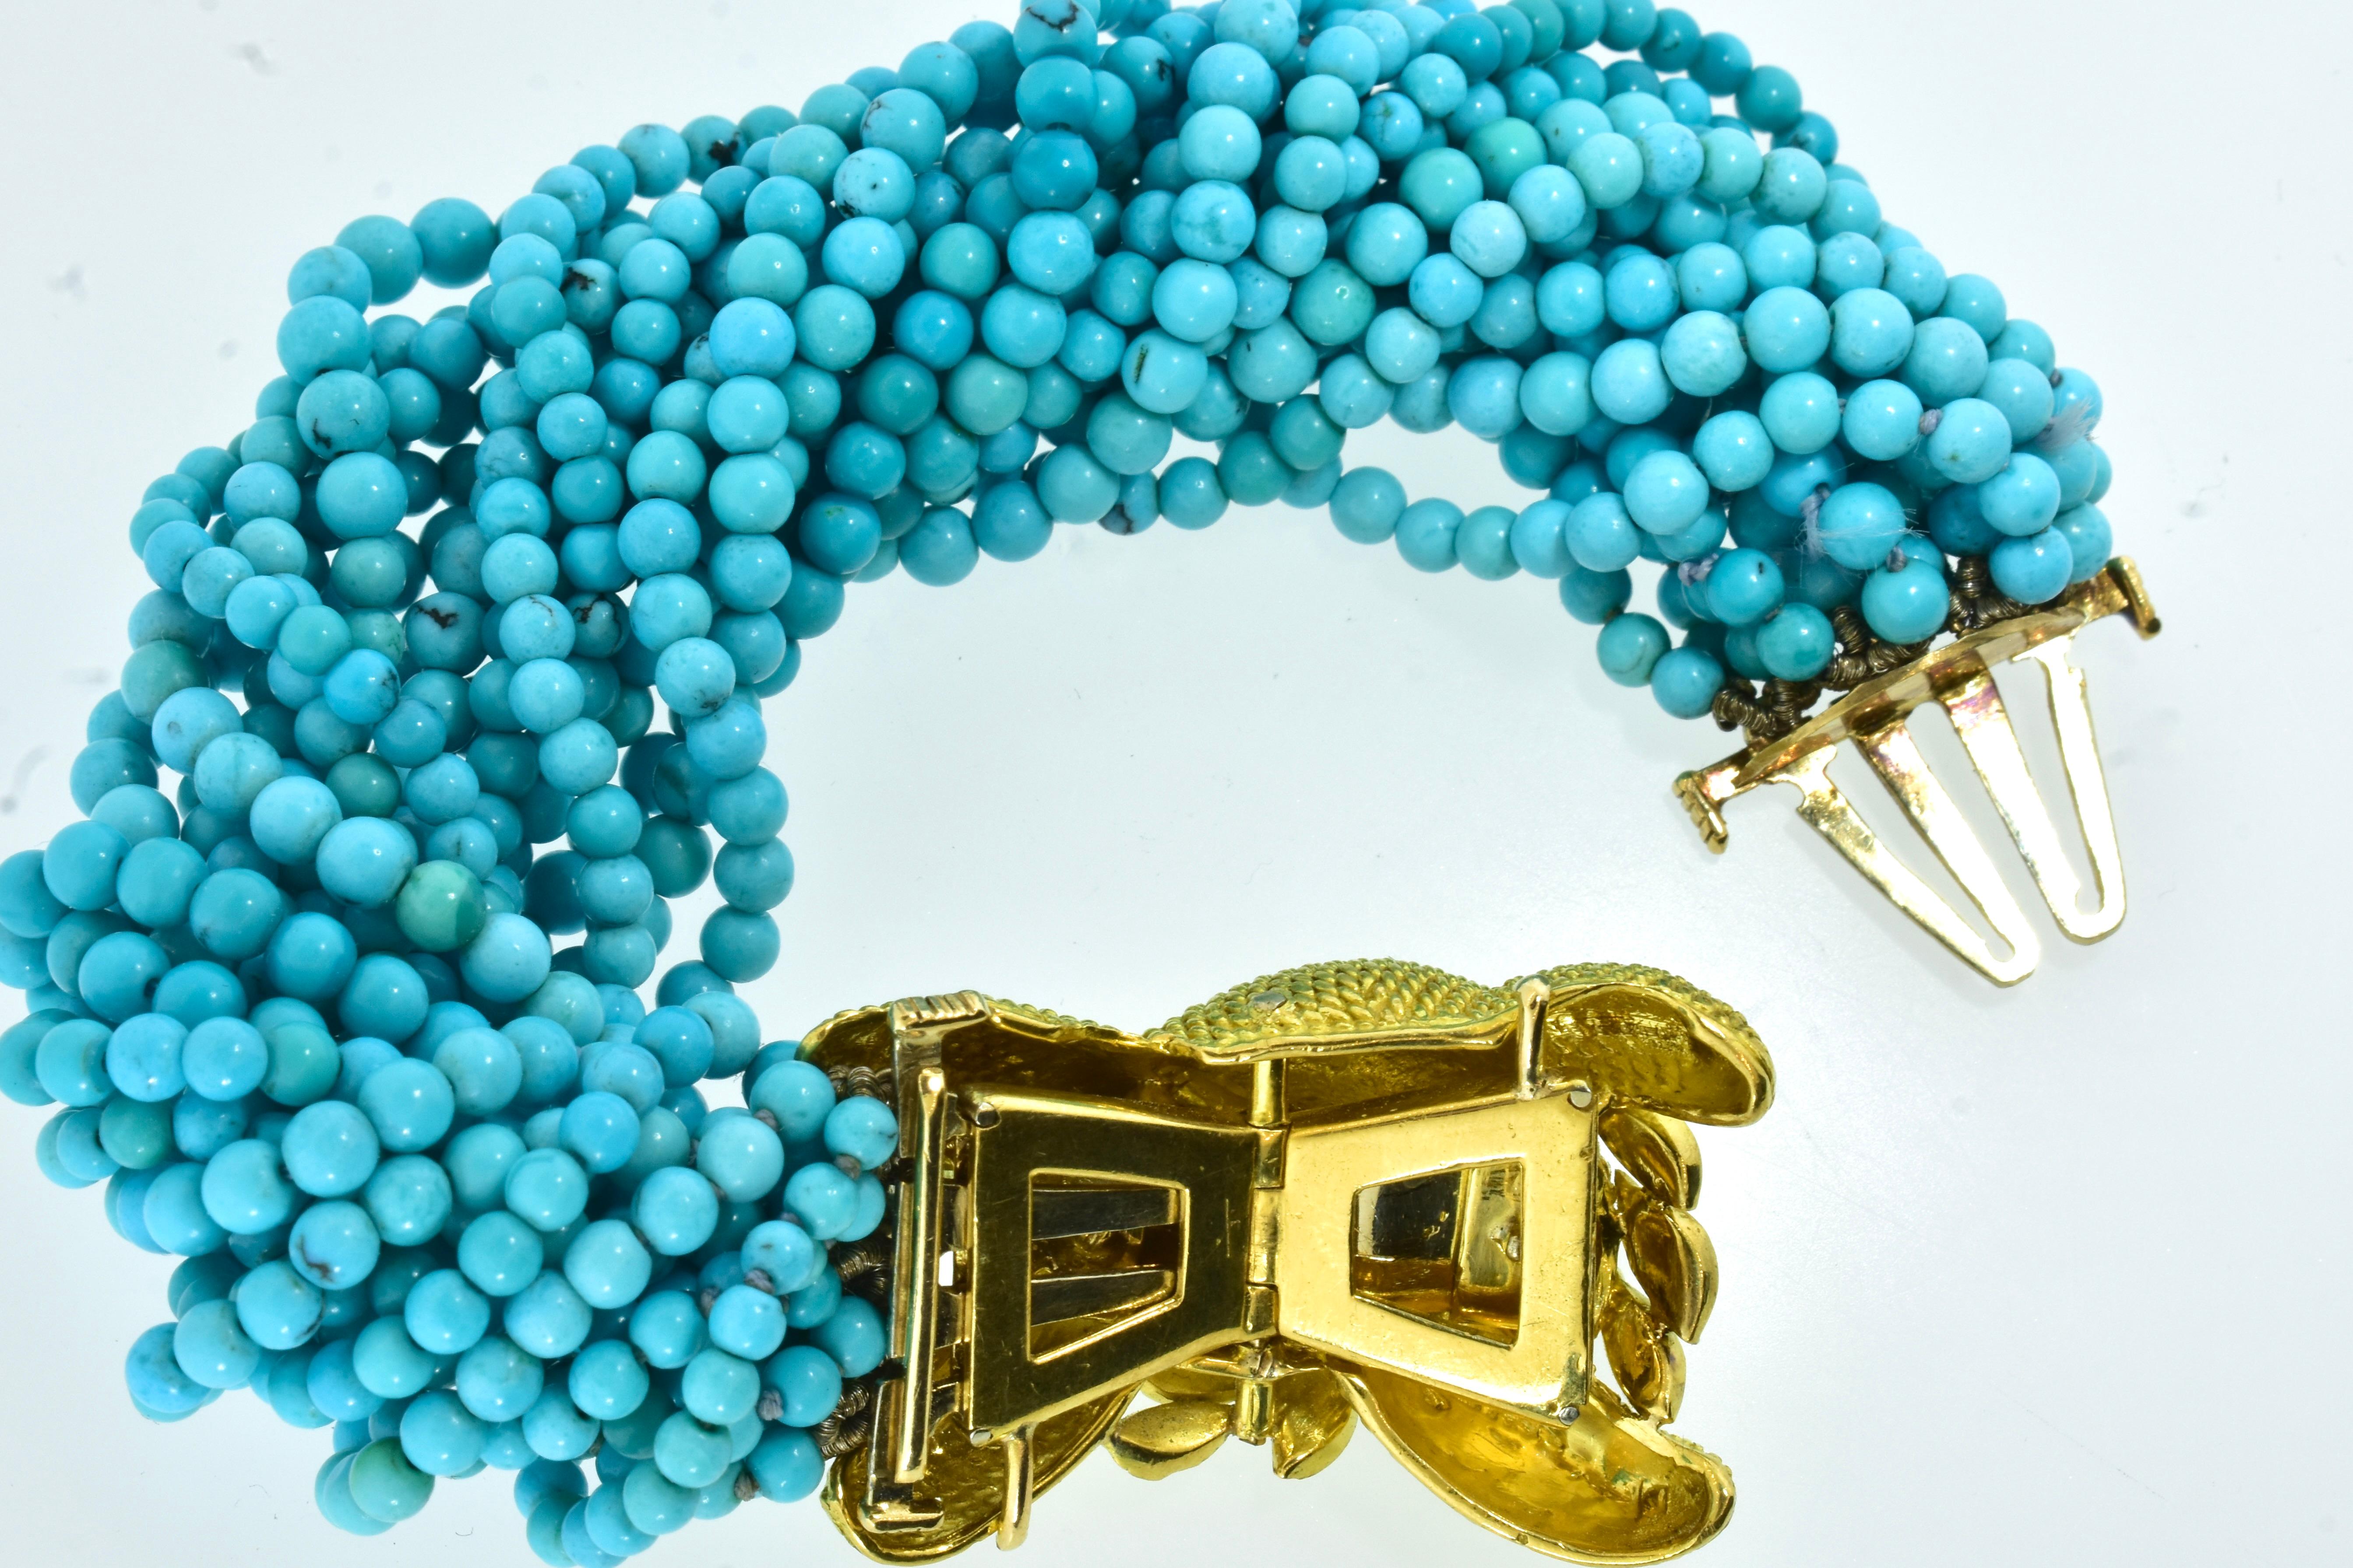 Fine Turquoise Bead Torsade Bracelet Centering an 18K High Relief Clasp, c. 1965 For Sale 3